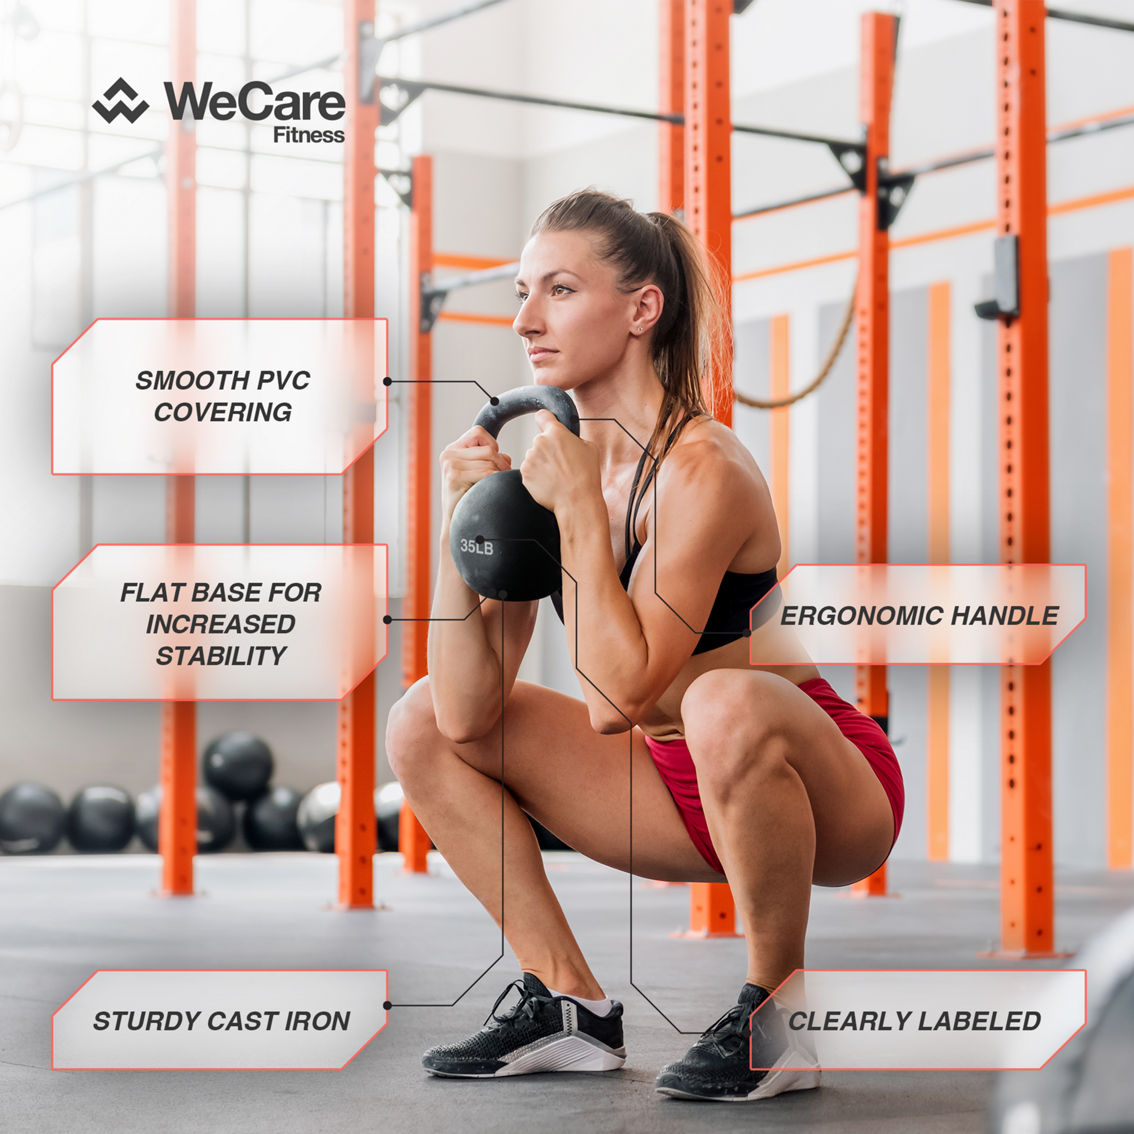 WeCare 15 LB Cast Iron Fitness Kettlebell - Image 8 of 8